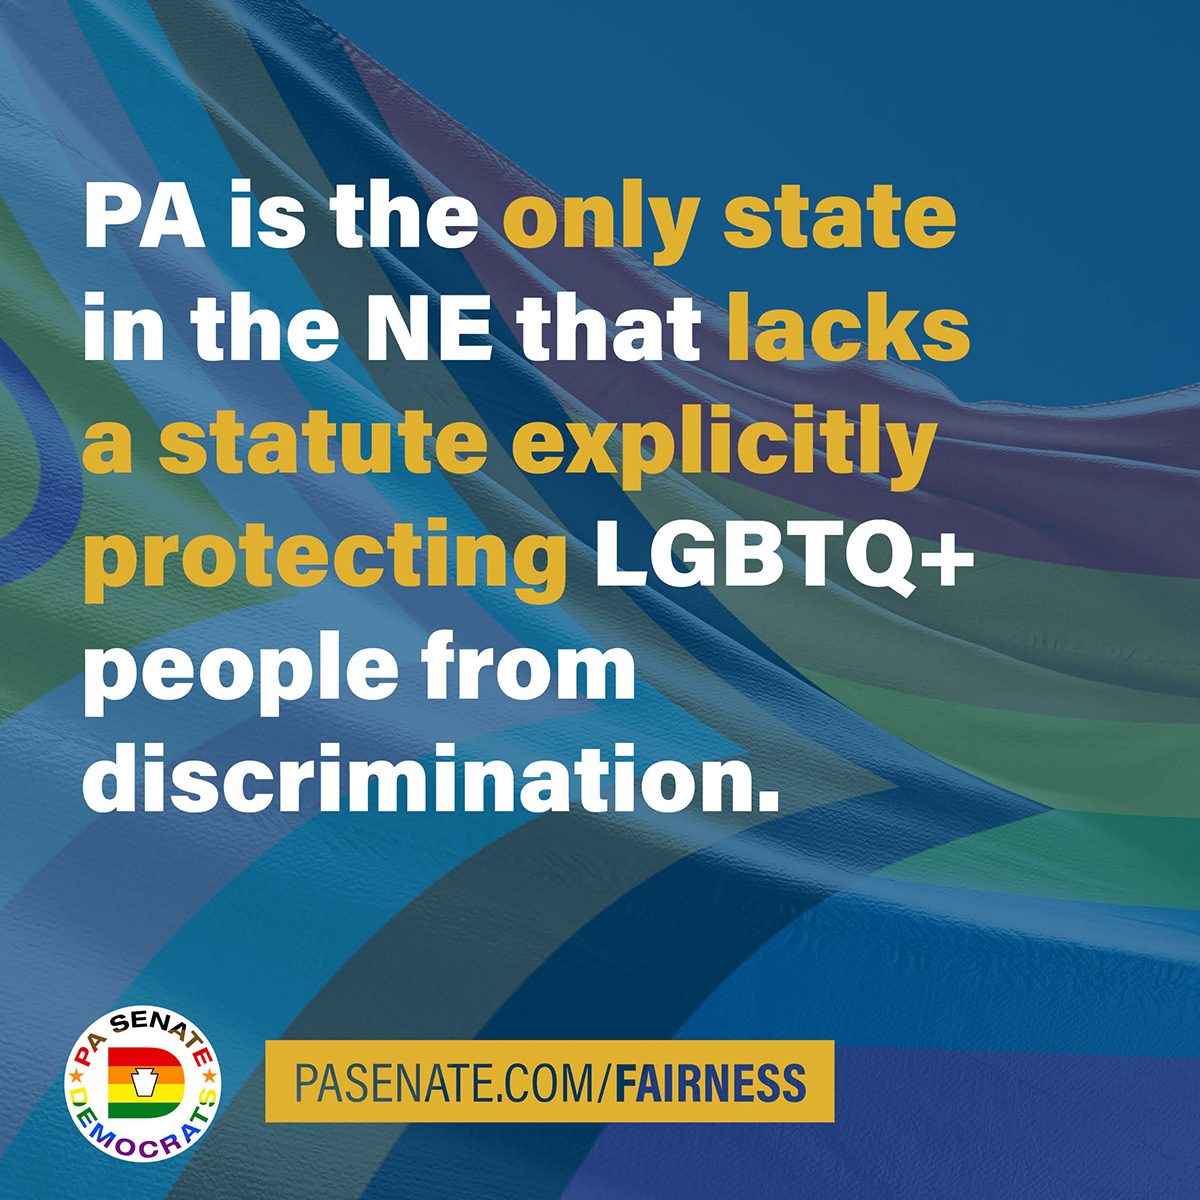 PA is the only state in the NE that lacks a statue explicitly protecting LGBTQ+ people from discrimination.